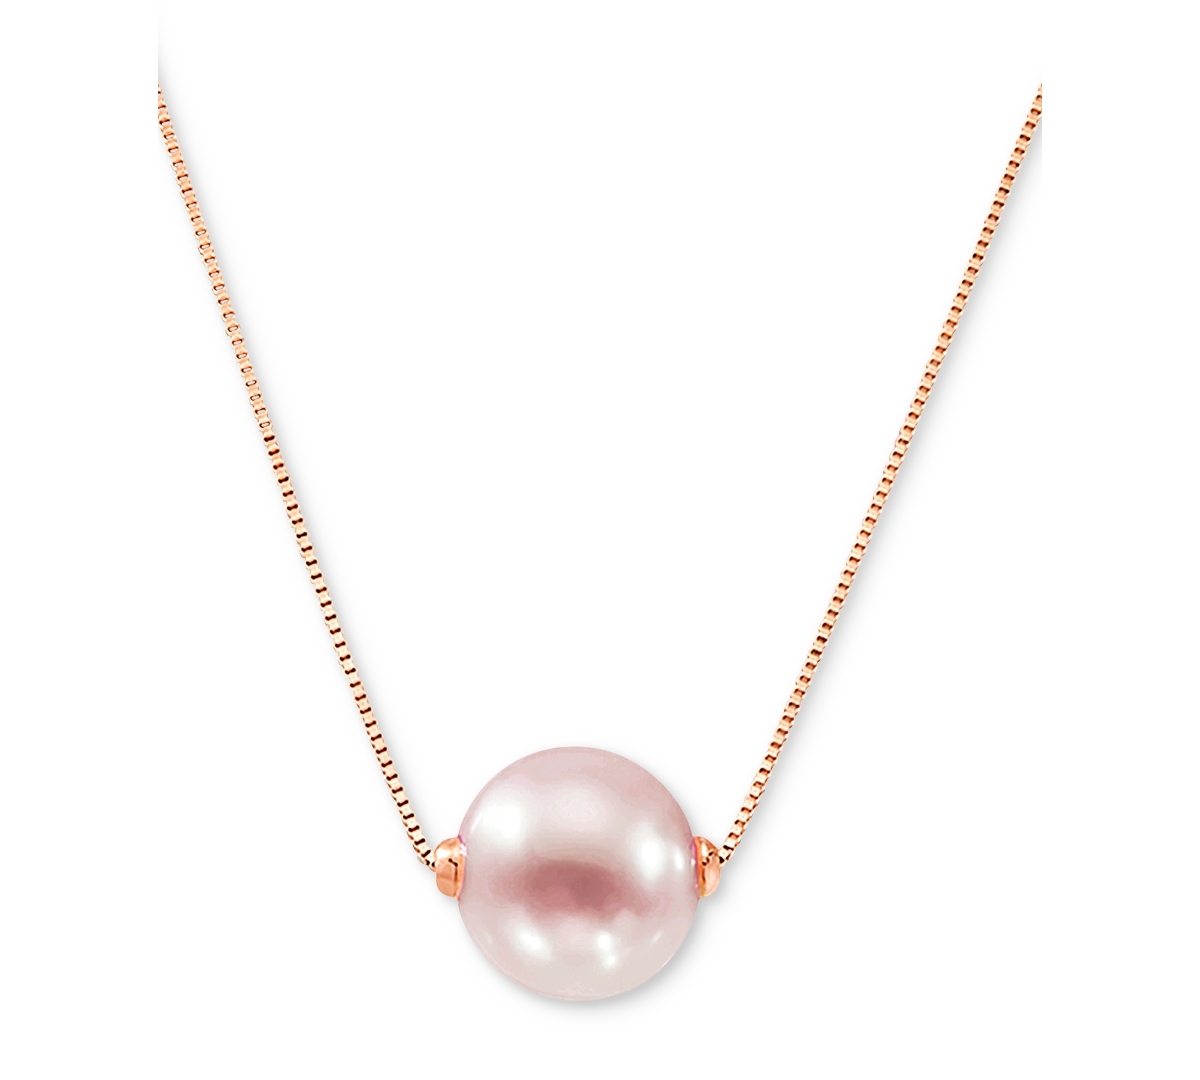 HONORA CULTURED FRESHWATER PEARL (8-1/2MM) 18" PENDANT NECKLACE IN 14K GOLD (ALSO IN PINK CULTURED FRESHWAT